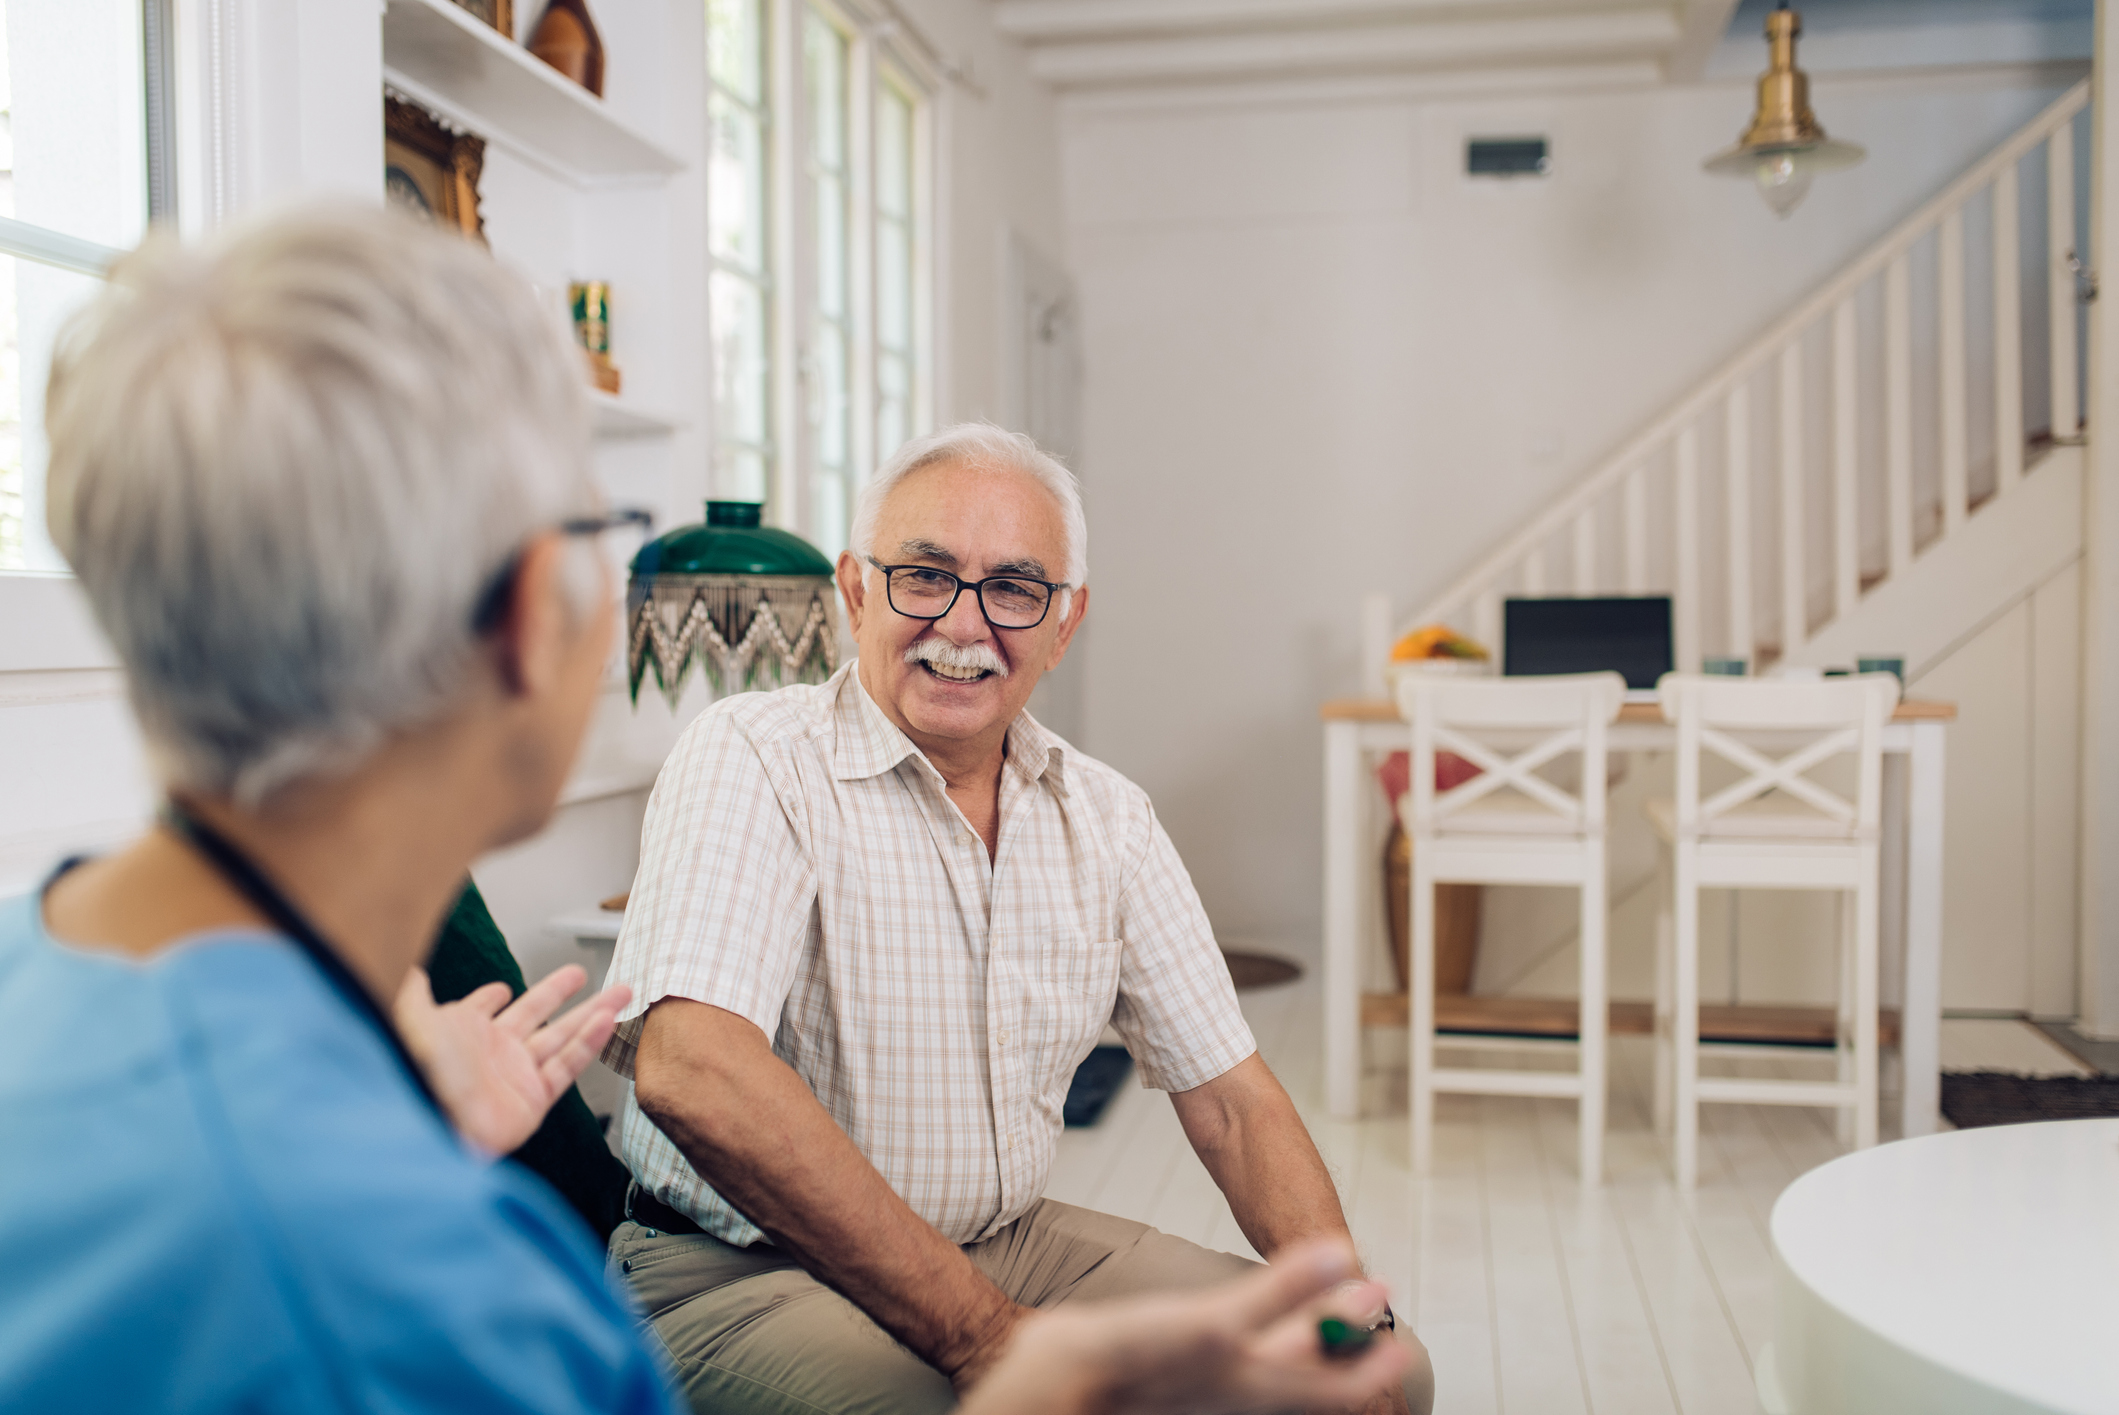 : An in-home care consultation can bring peace of mind when taking care of elderly parents.